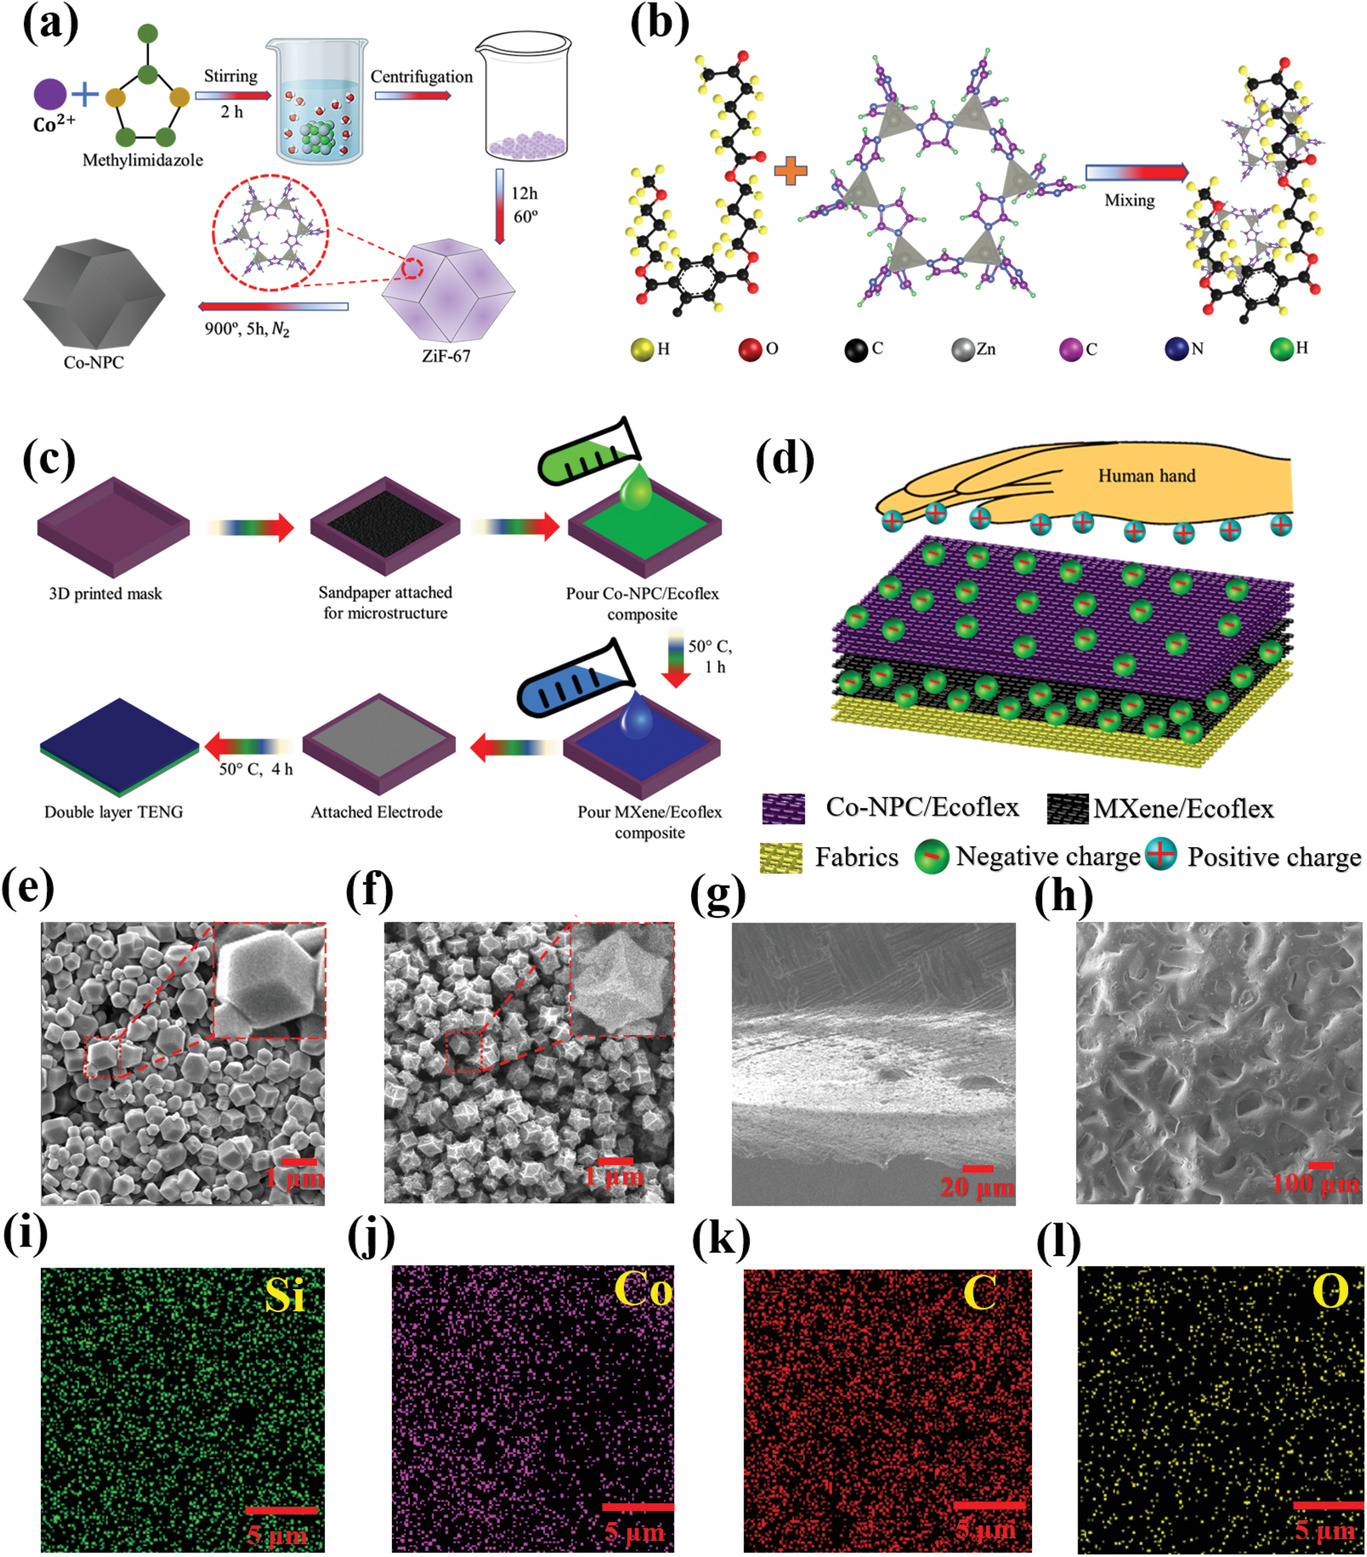 Cobalt-Nanoporous Carbon Functionalized Nanocomposite-Based Triboelectric Nanogenerator for Contactless and Sustainable Self-Powered Sensor Systems